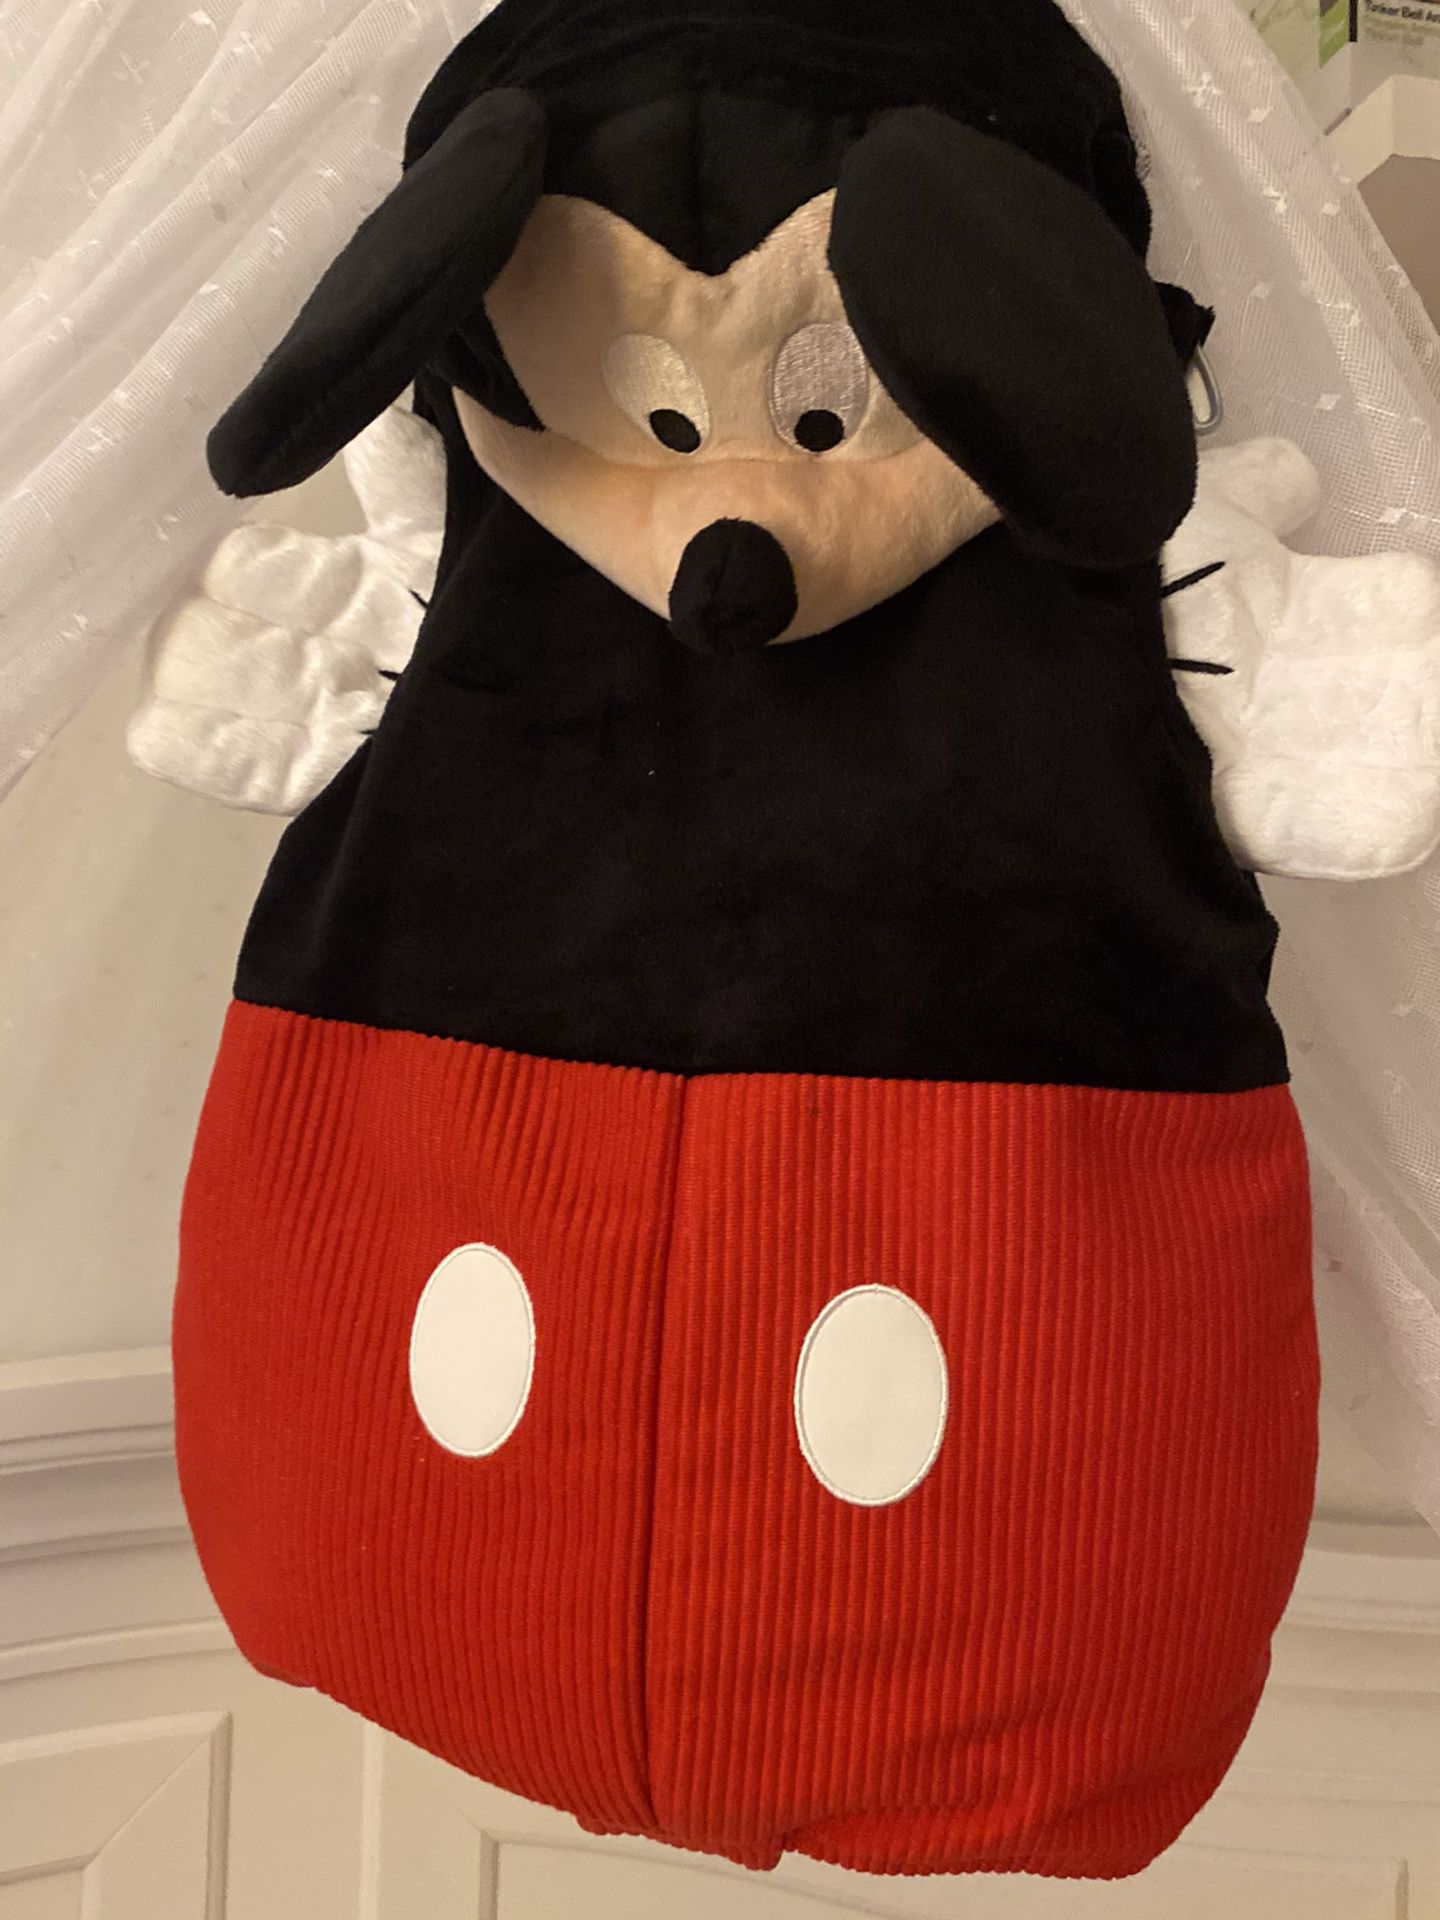 Costume mickey mause 12 months